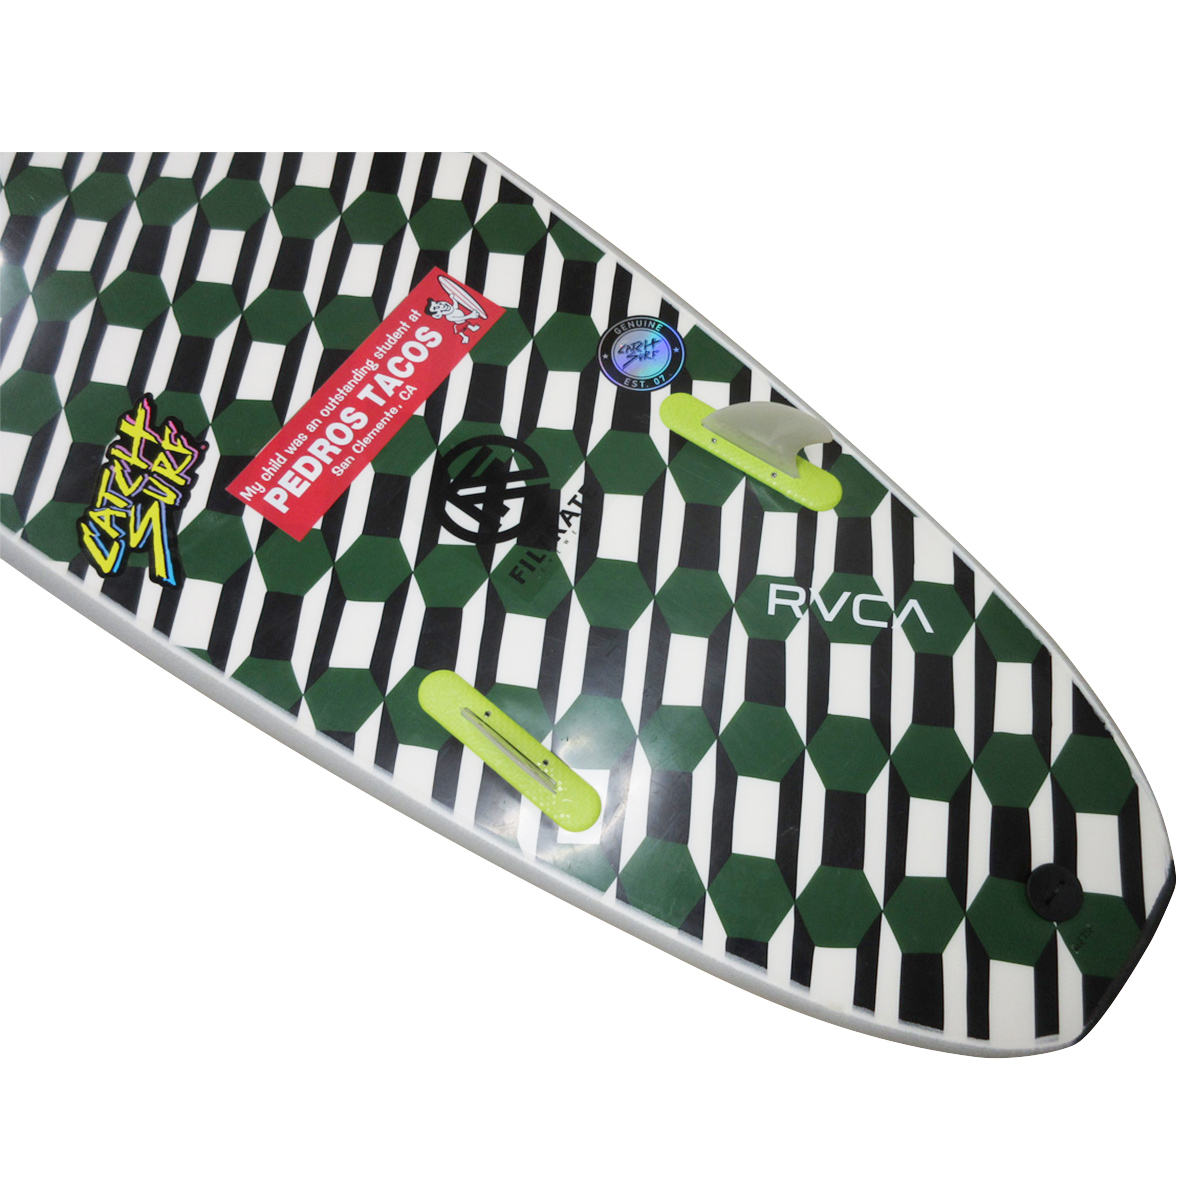 CATCH SURF  / Barry McGee DFW Edition 7.0 Side bite fin